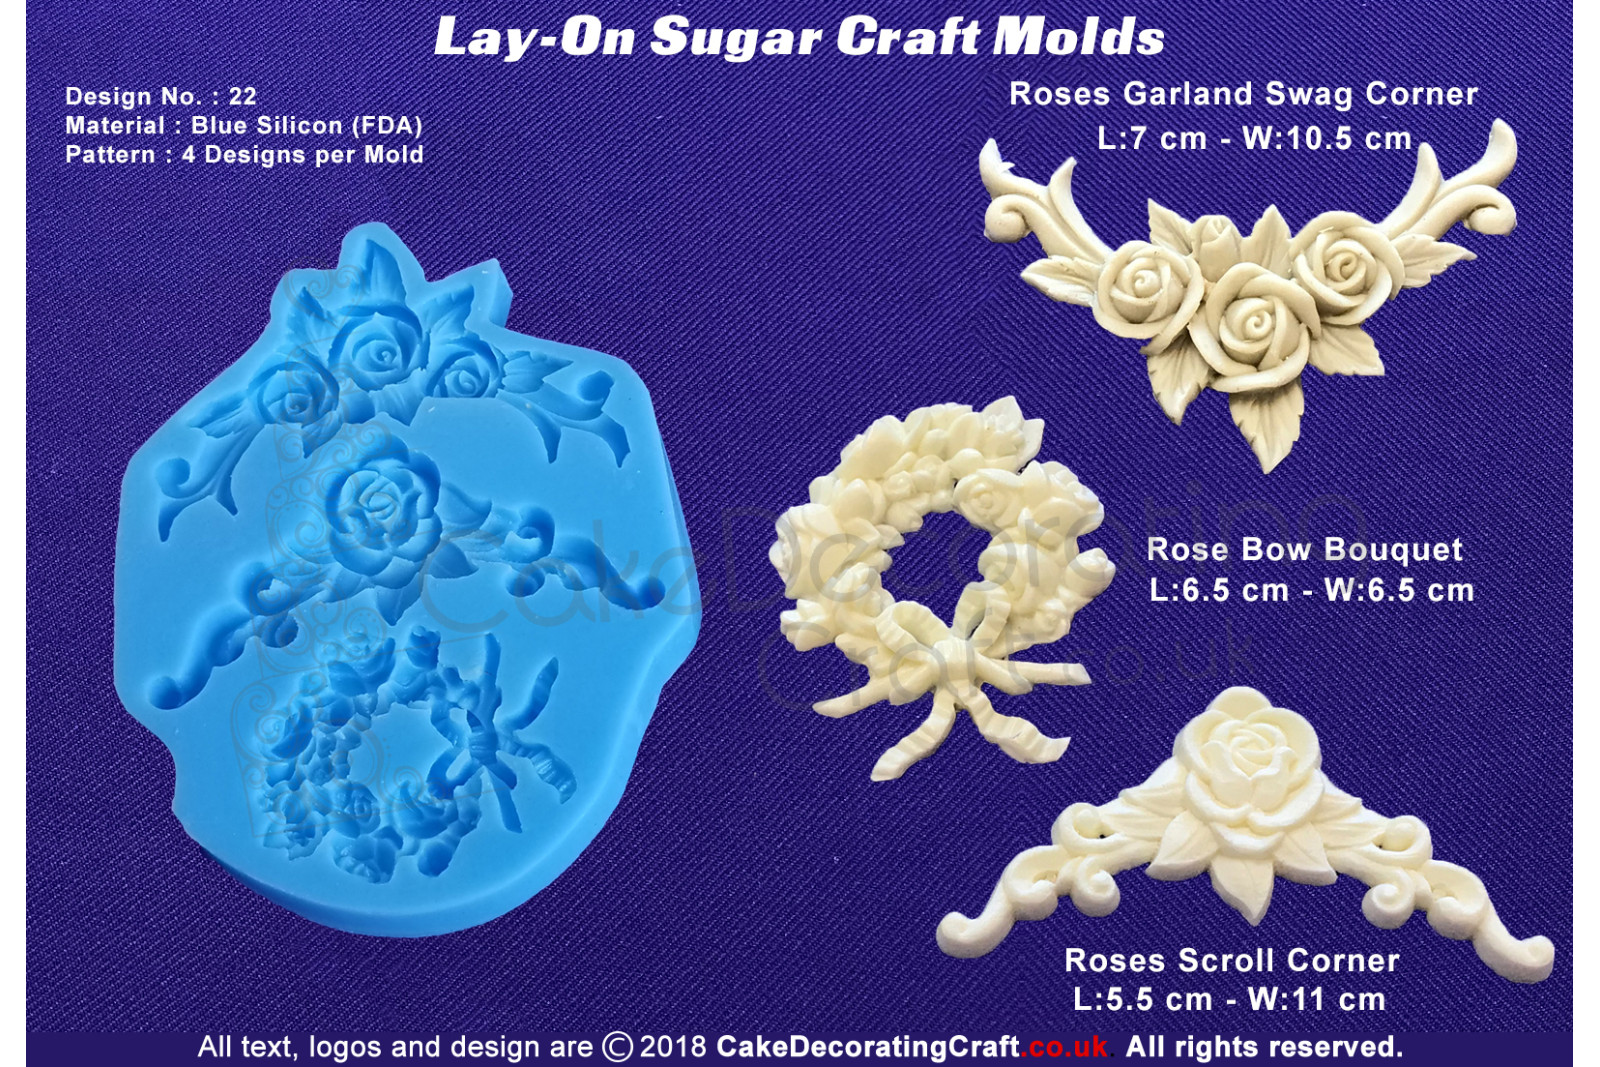 Design 22 | Lay-On Silicone Cake Molds | Deep Floral Roses | Wedding Cakes | Design | Sugar Cake Decorating Craft 